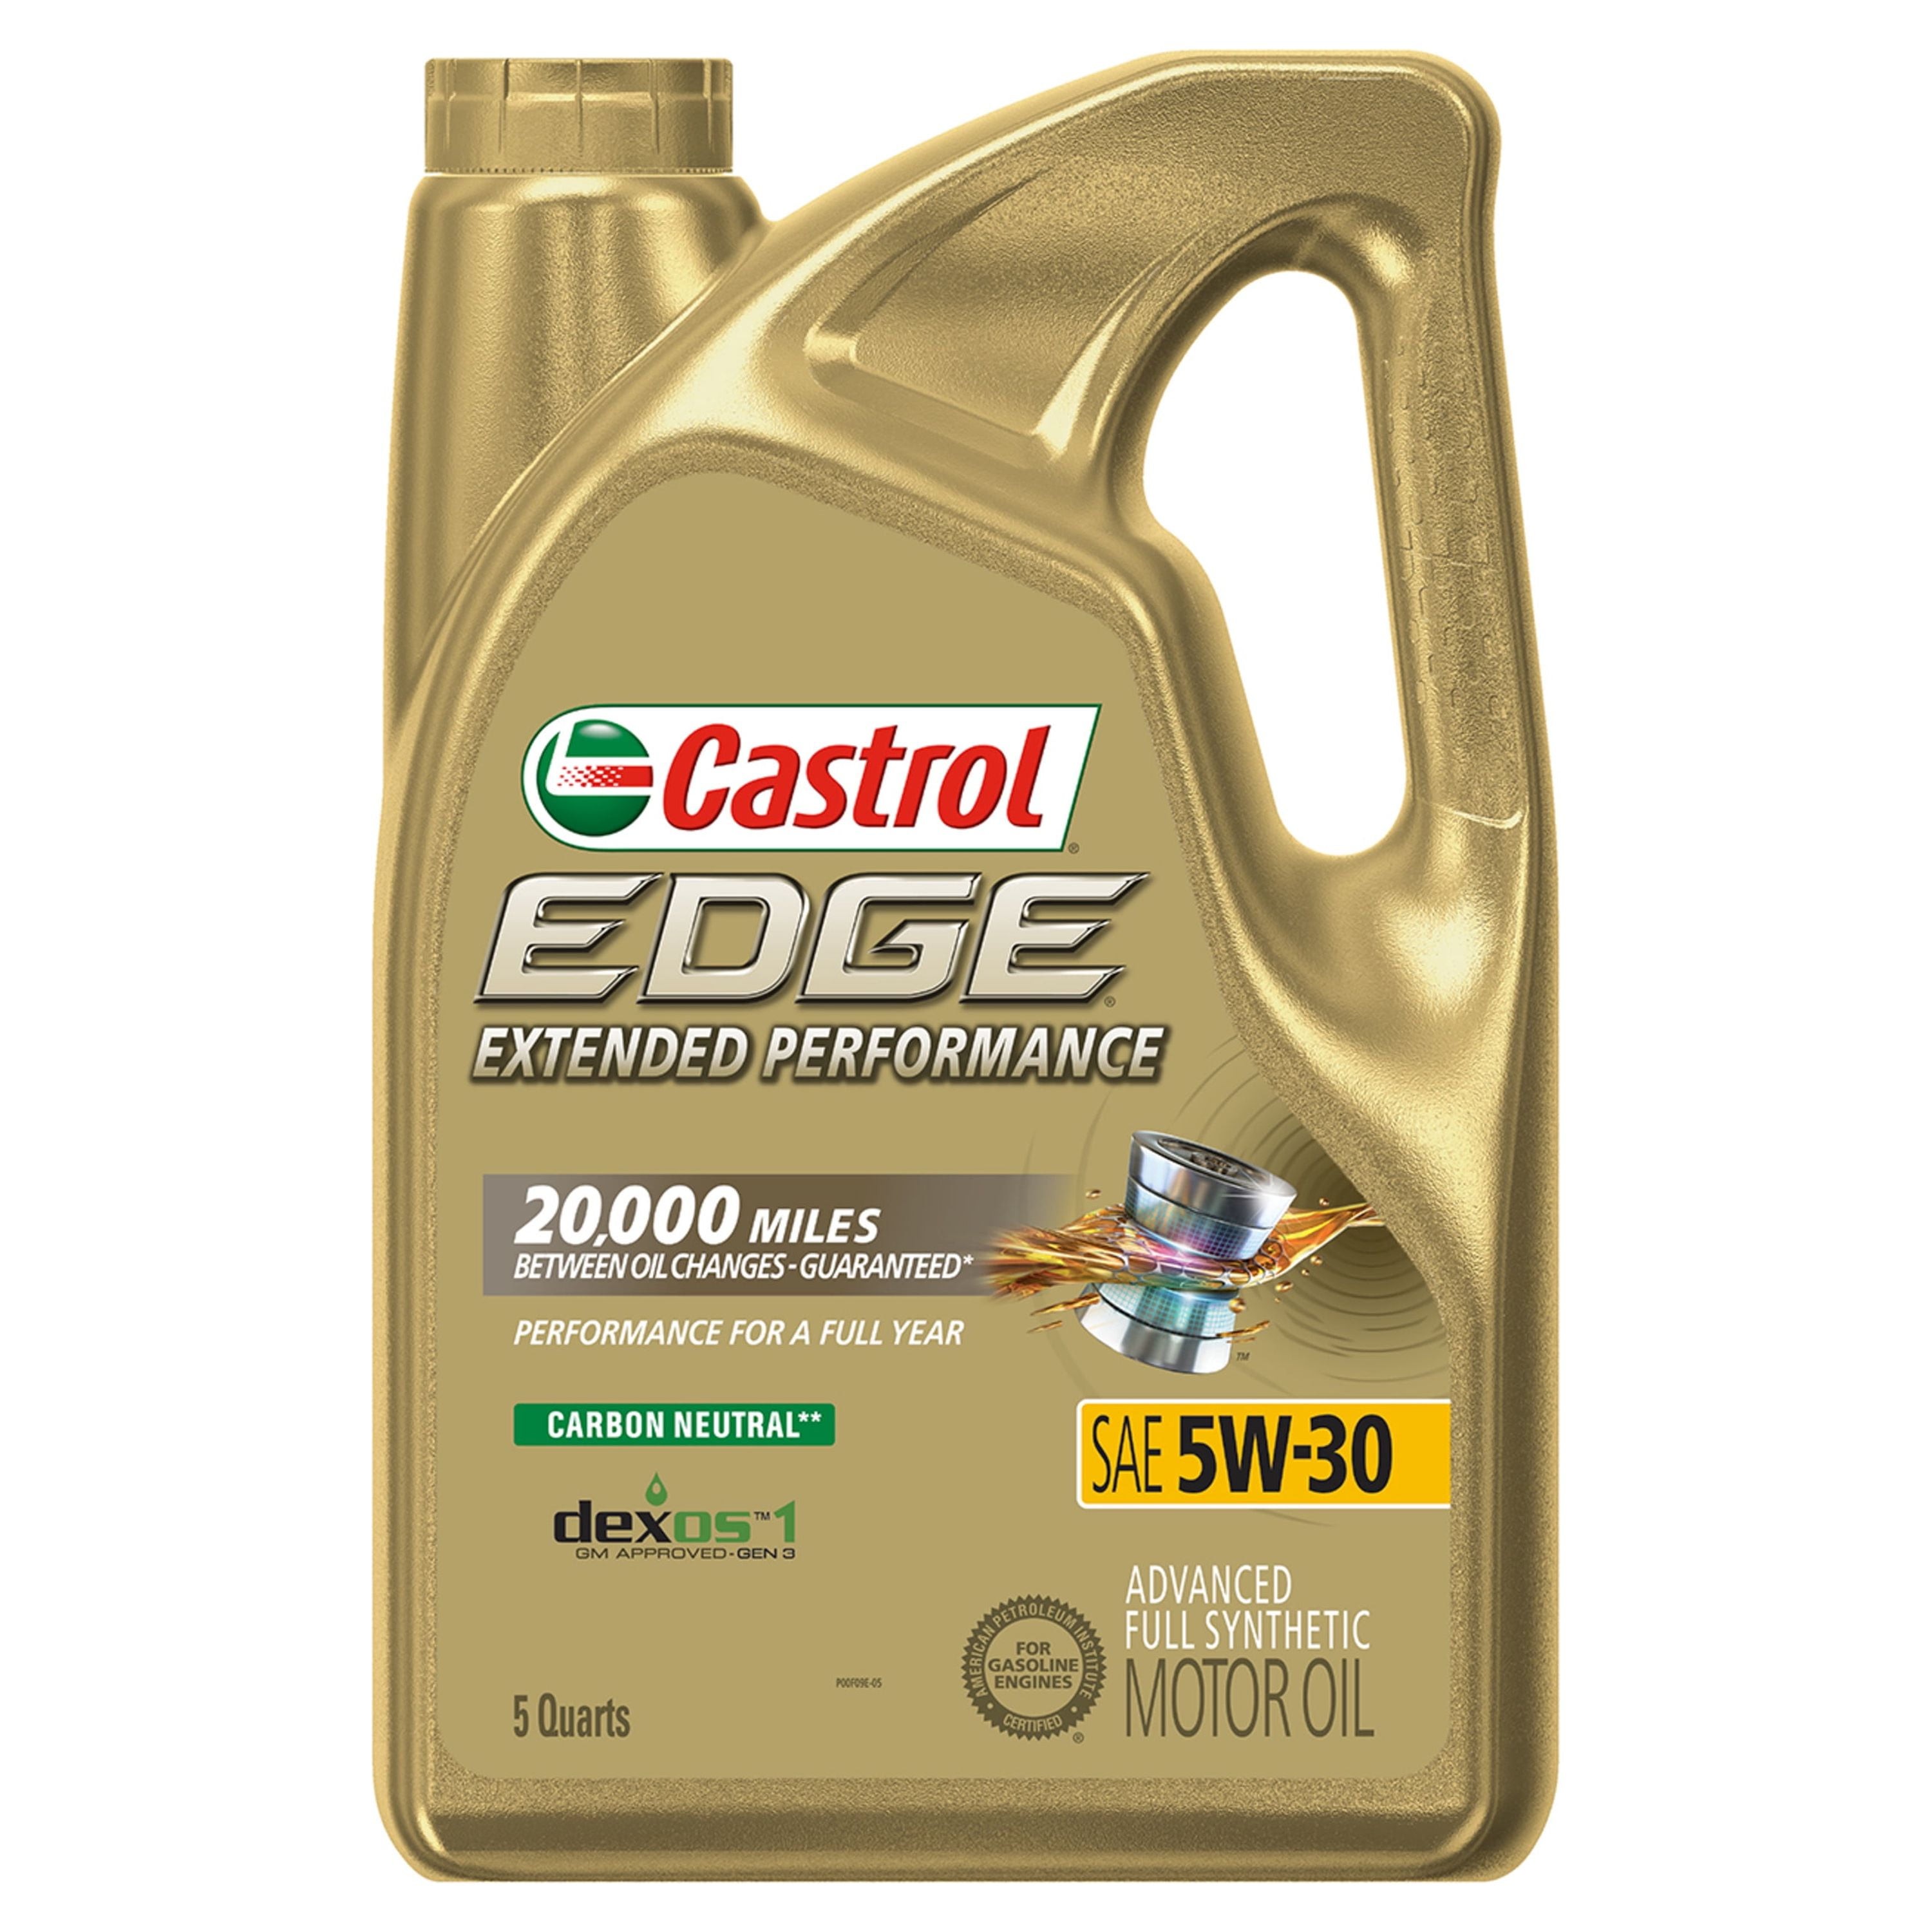 Castrol EDGE 5W30 Full Synthetic 5 L, A premium fully-synthetic motor oil 